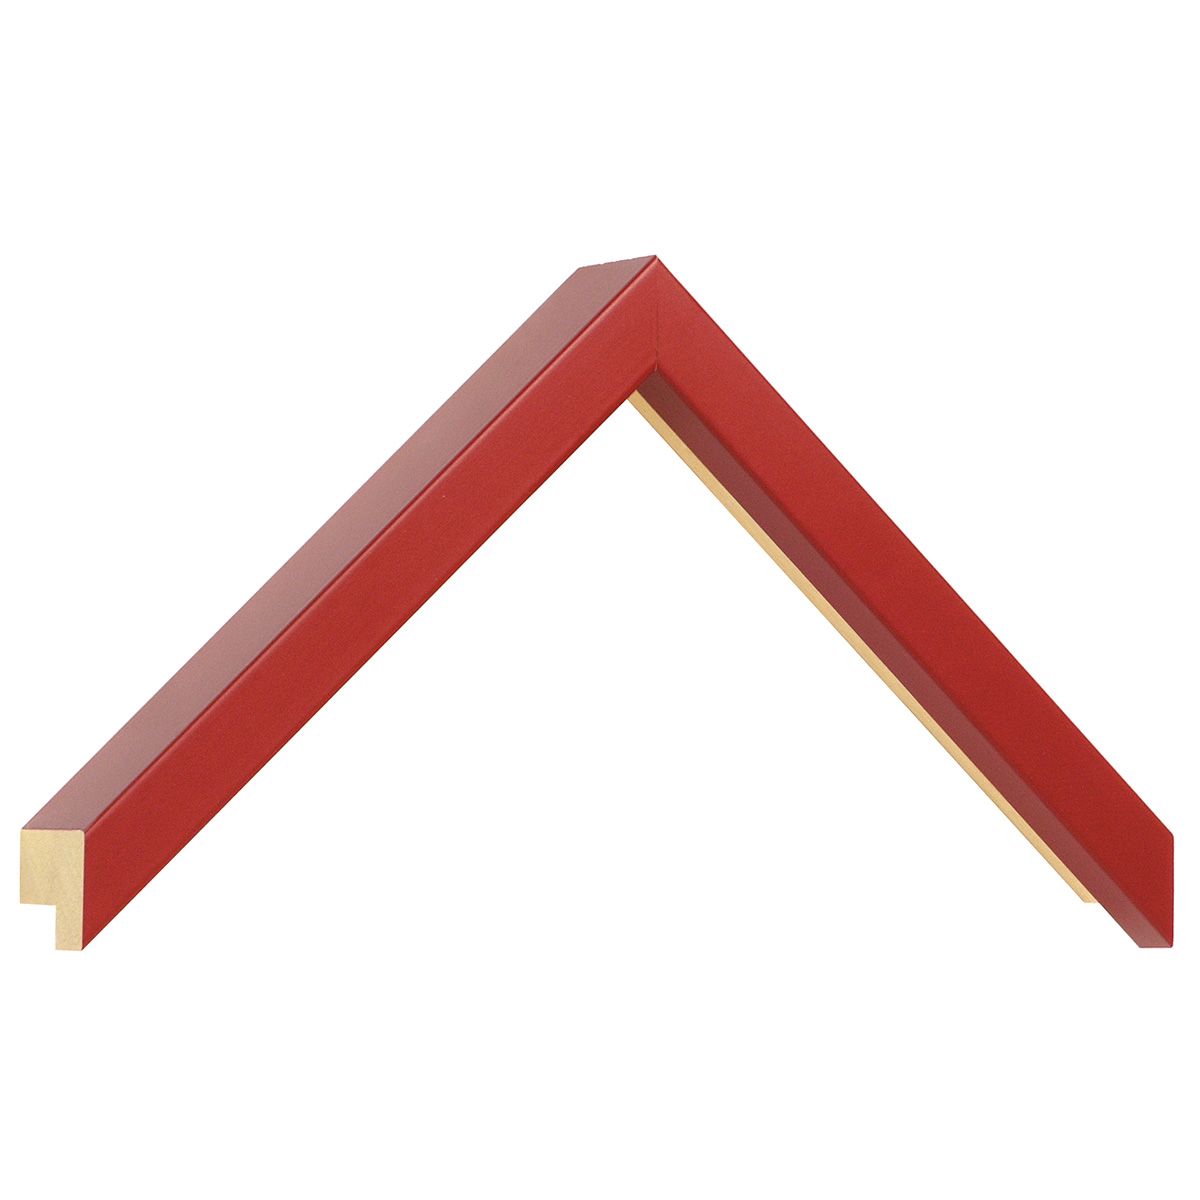 Moulding ayous - Widht 15 mm - Height 40 mm - Red - Sample